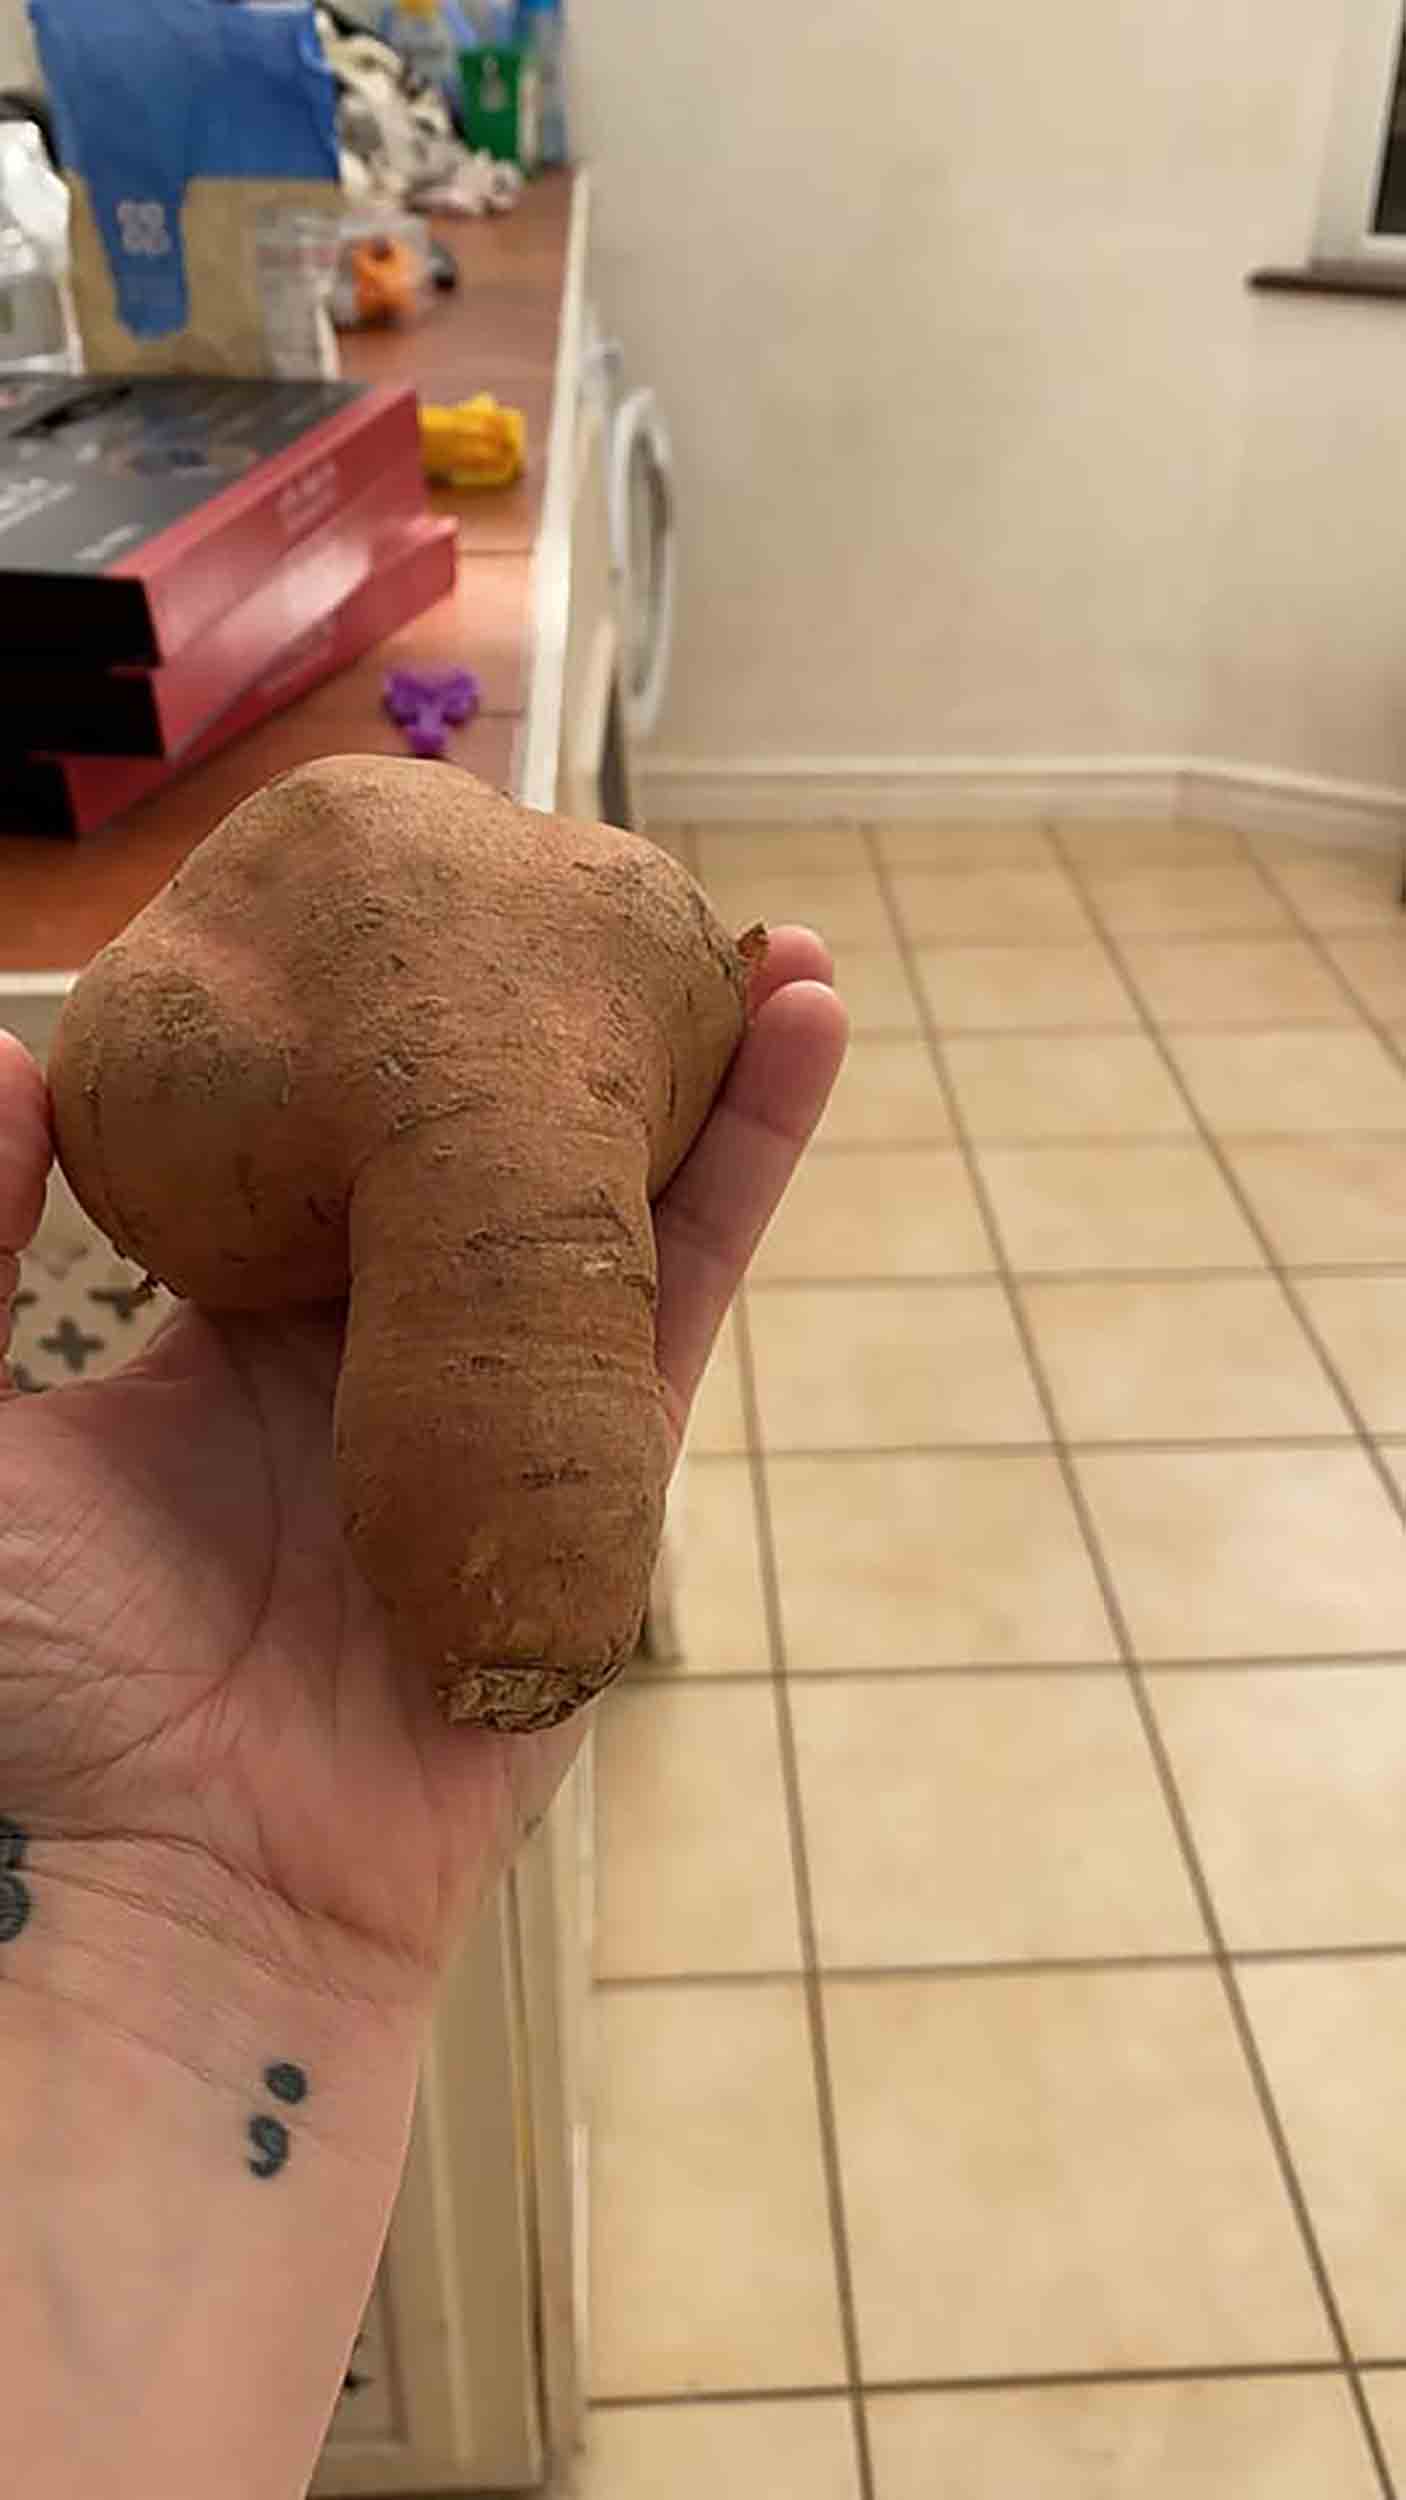 Security guard shocked after finding "realistic" willy-shaped sweet potato - Consumer News UK